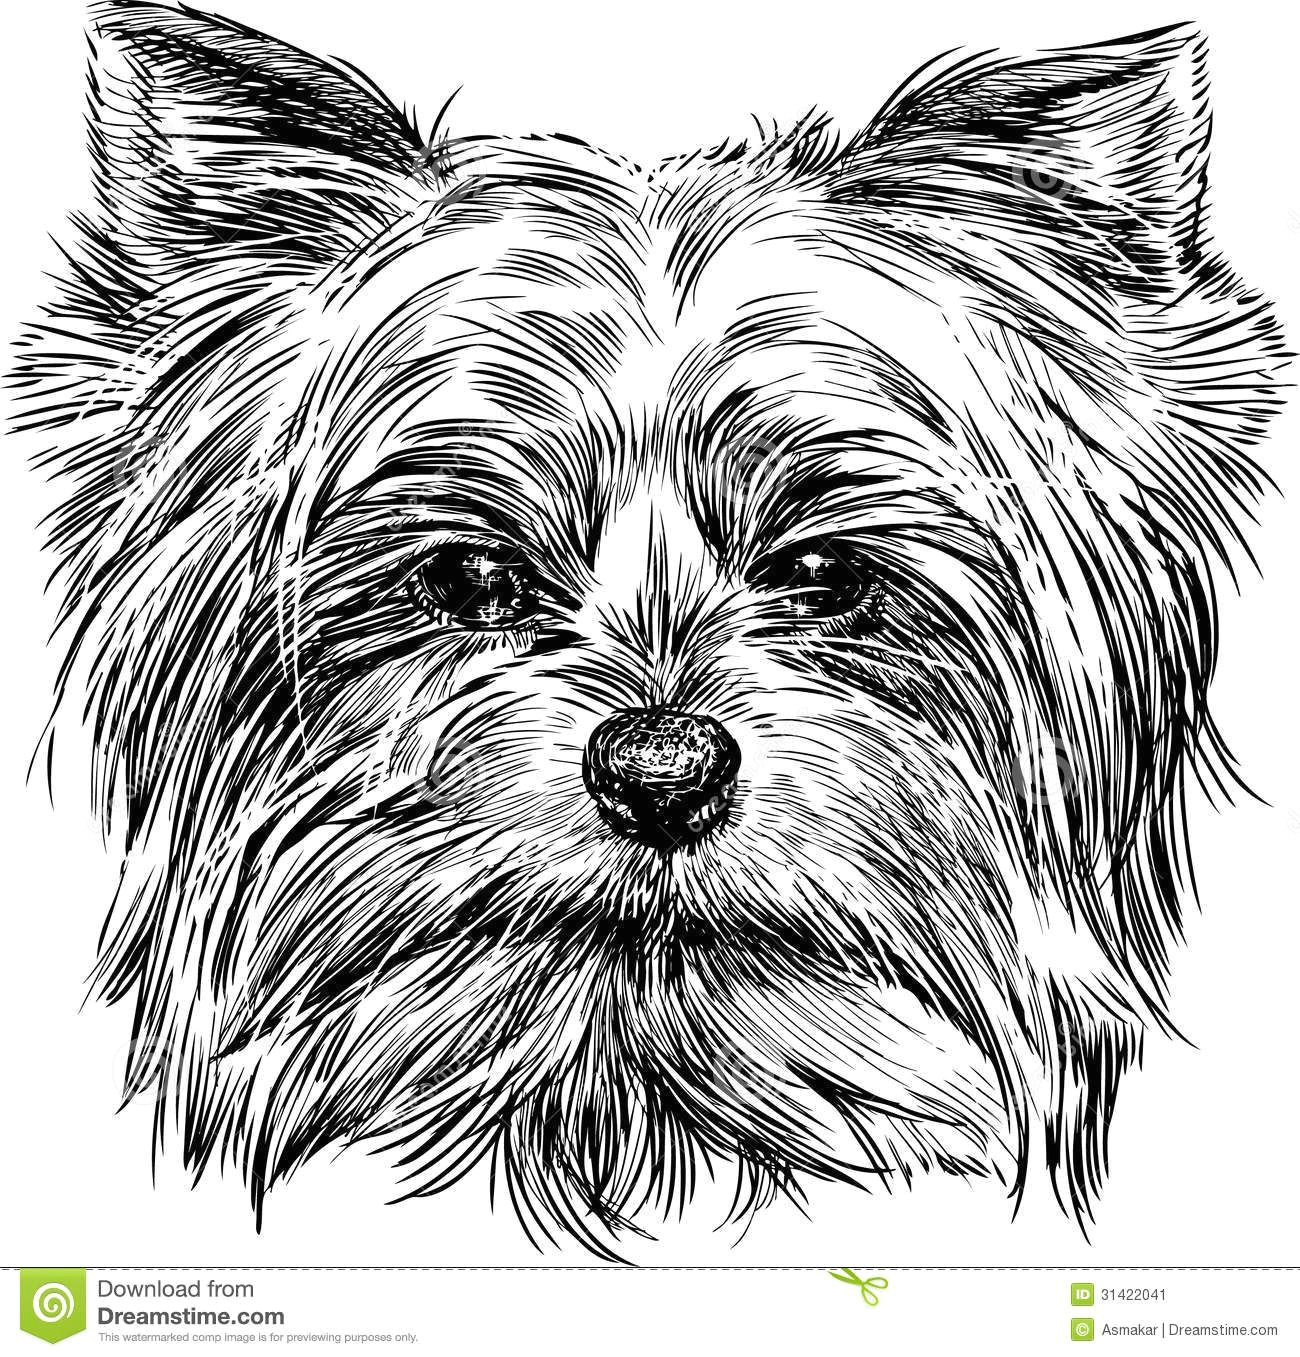 Dog Drawing Yorkie Pin by Michelle Ross On Sewing Patterns Pinterest Sketches Dog